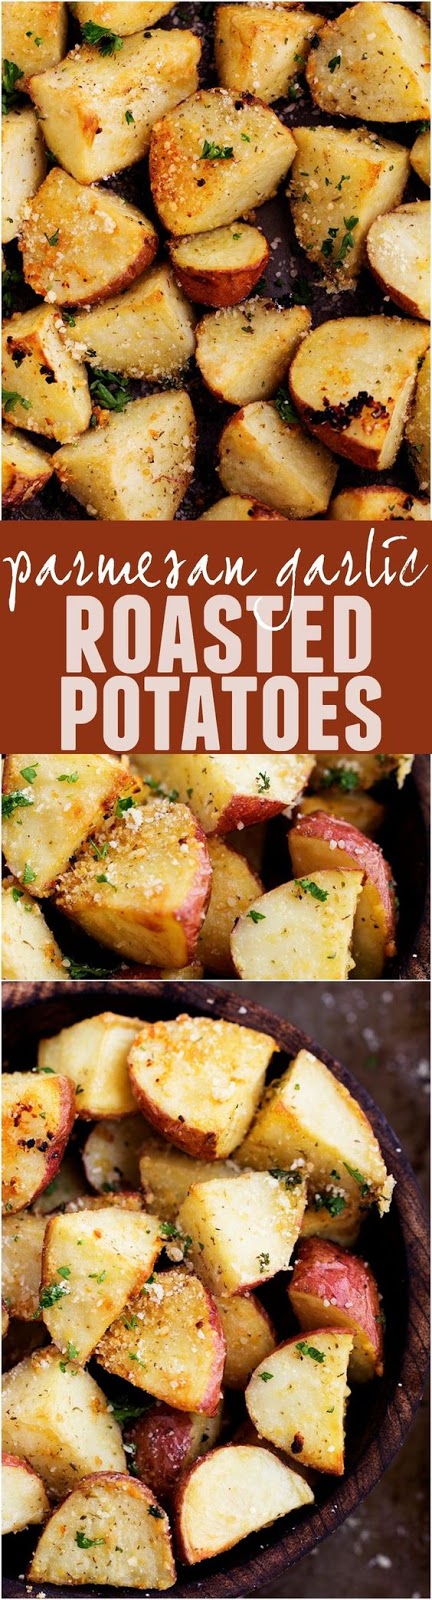 Potatoes that roast in the oven and get a crispy edge and tender center. They have such a great parmesan garlic flavor and will be the perfect side!